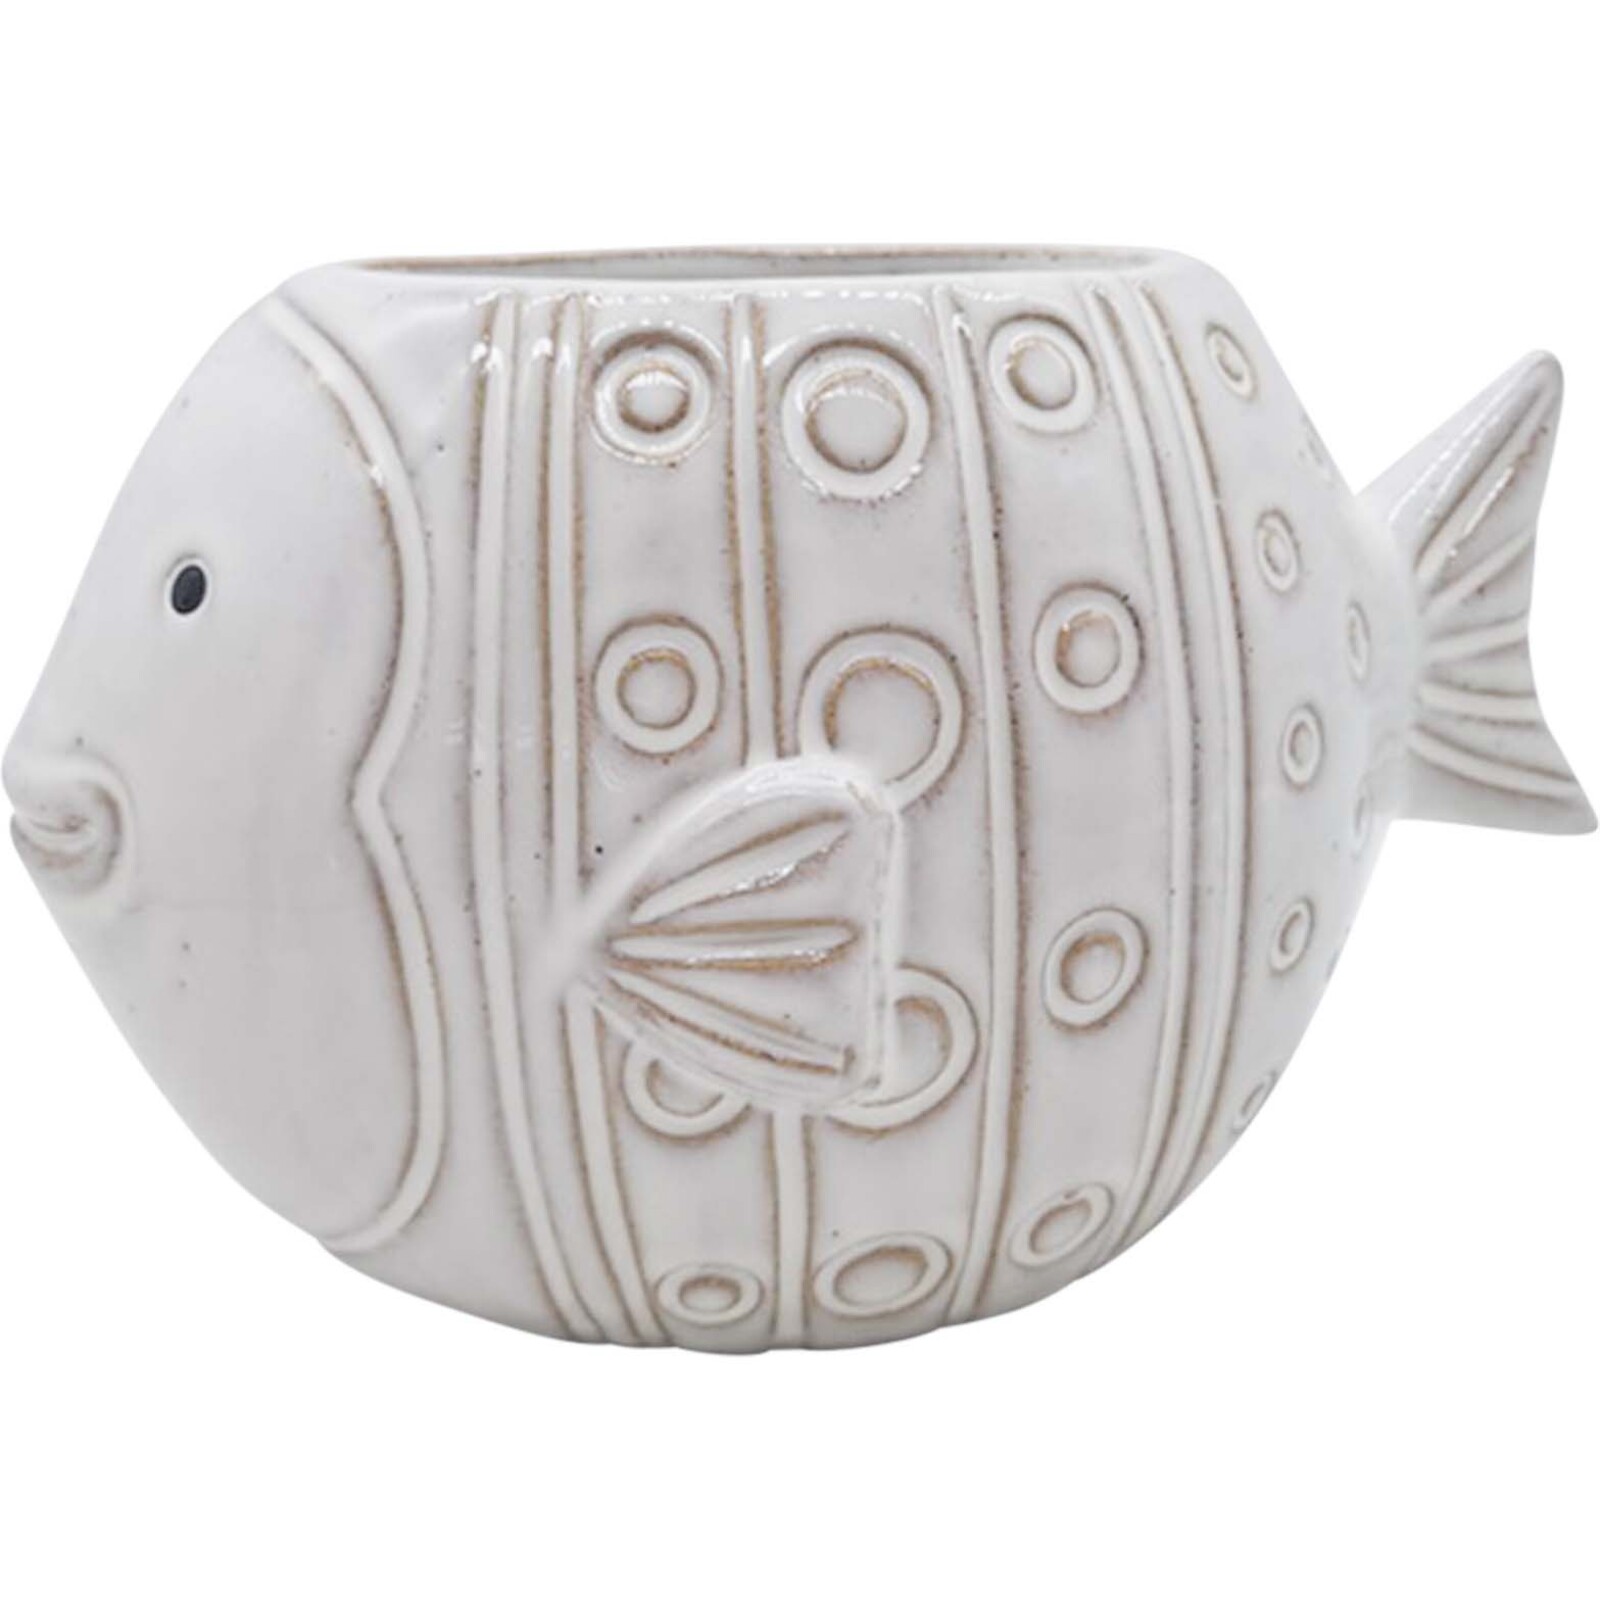 Planter Moby Fish White